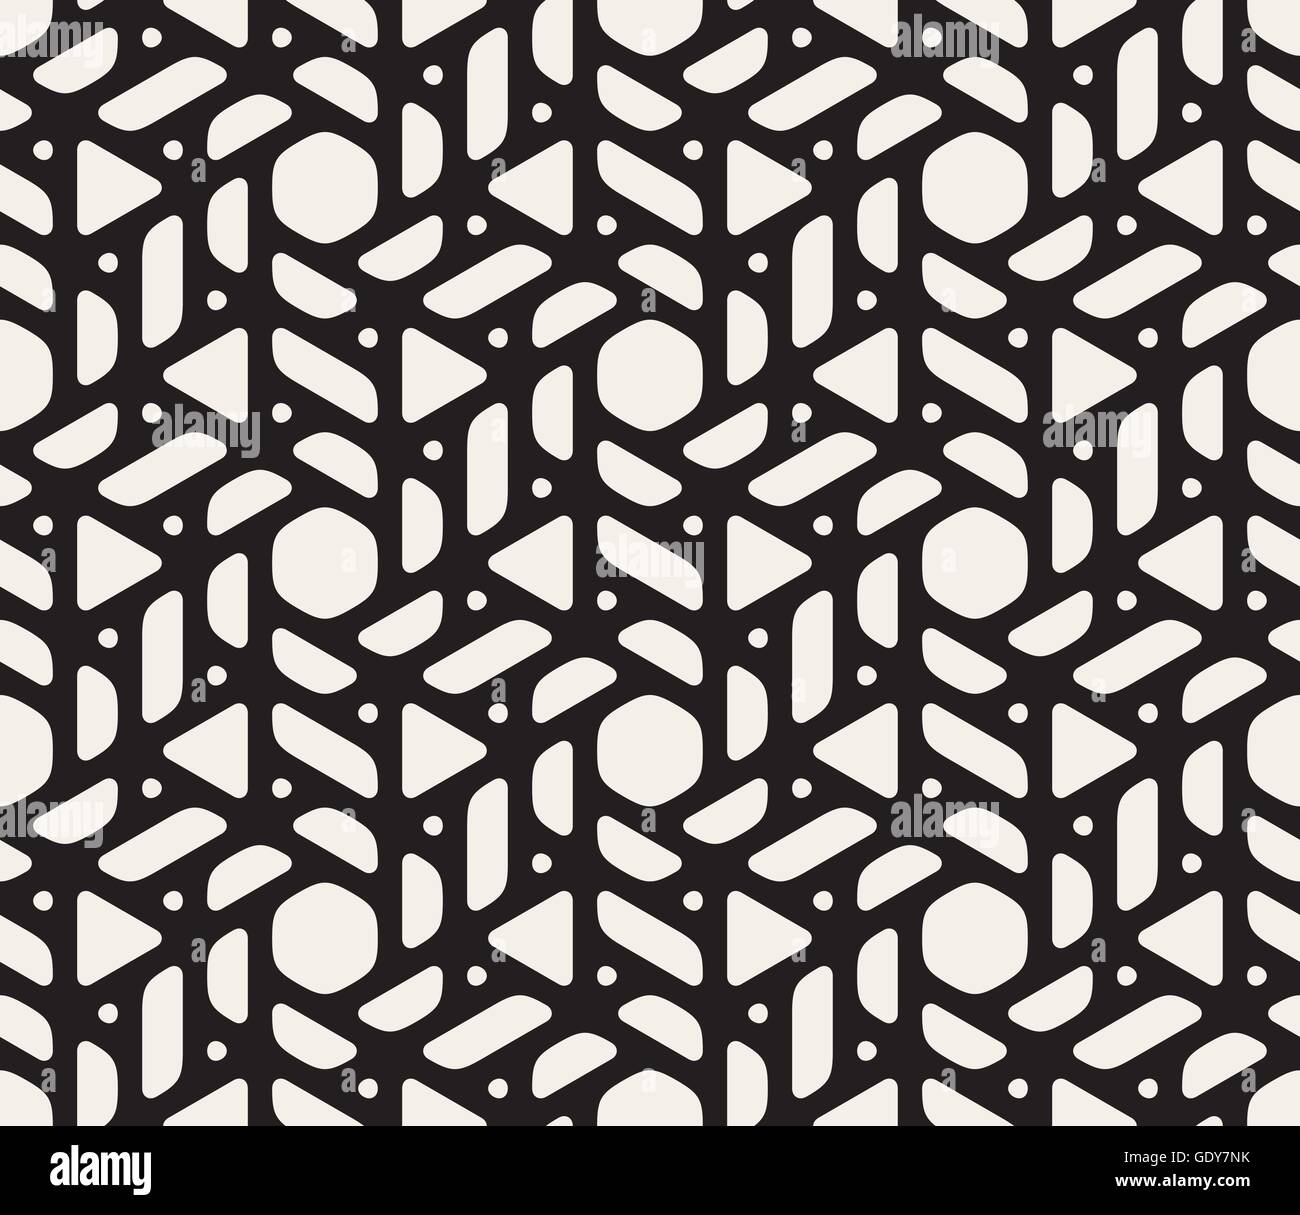 https://c8.alamy.com/comp/GDY7NK/vector-seamless-black-and-white-rounded-shapes-triangles-and-circles-GDY7NK.jpg